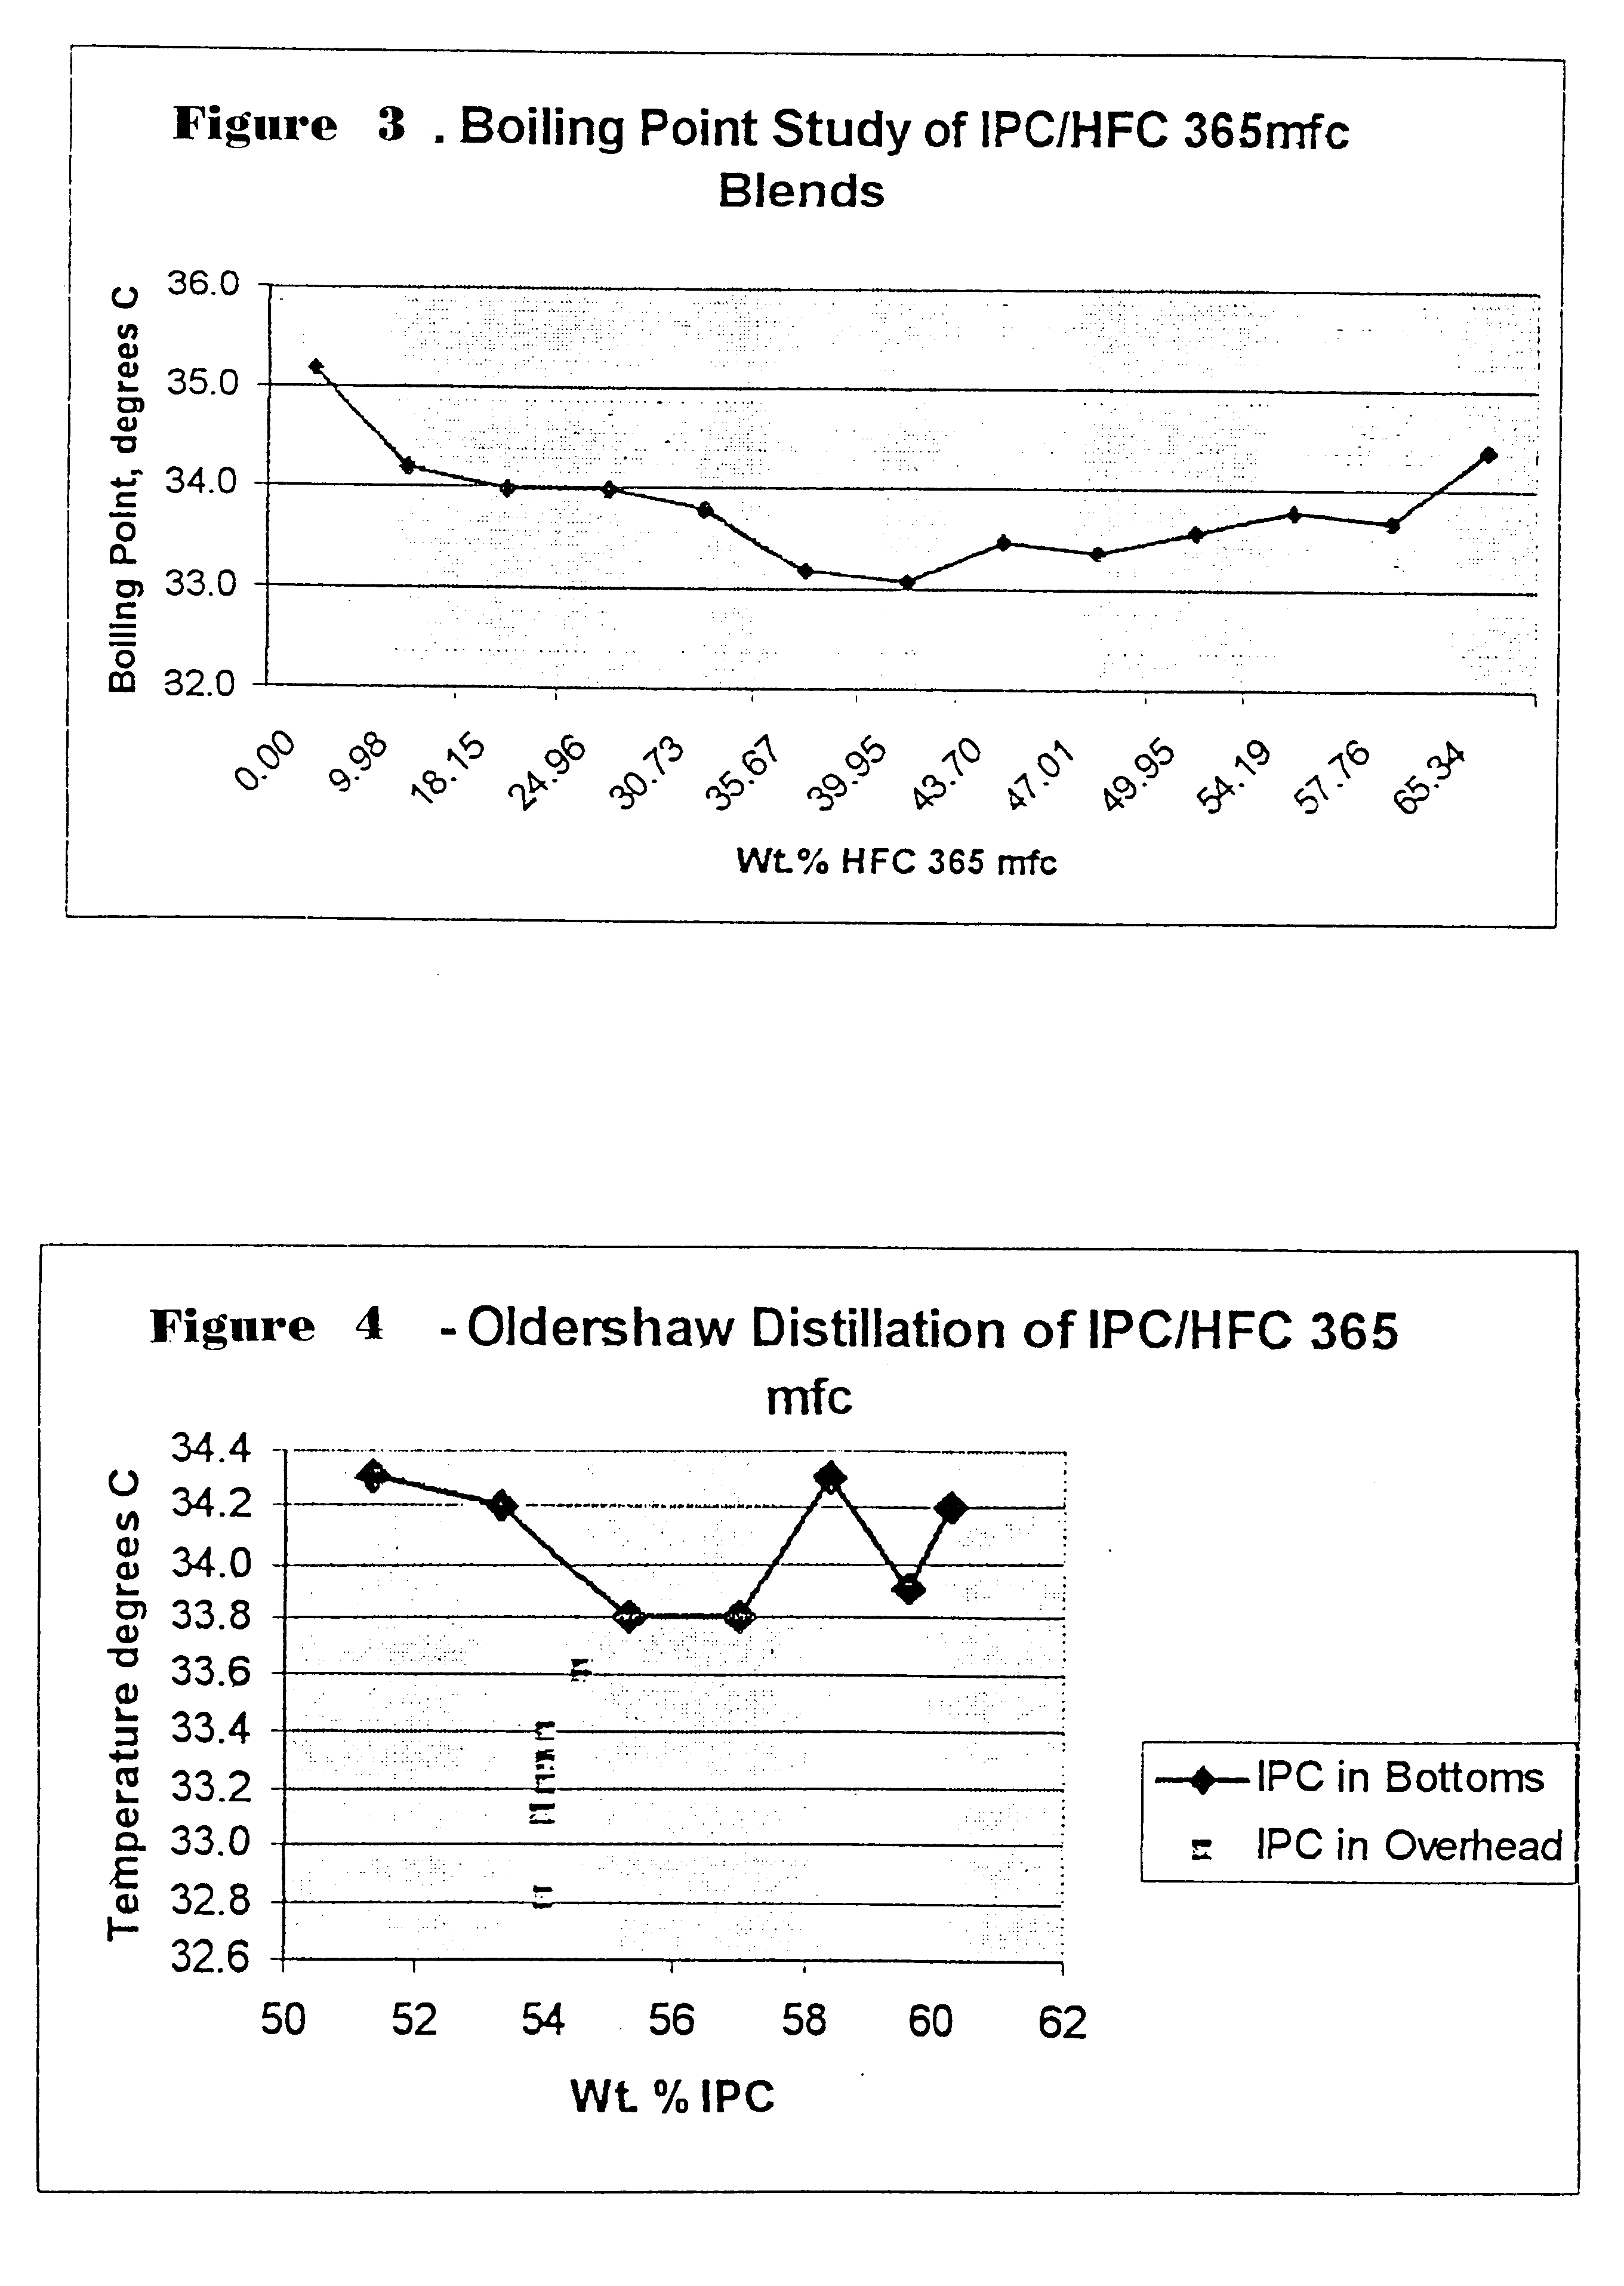 Isopropyl chloride with hydrofluorocarbon or hydrofluoroether as foam blowing agents